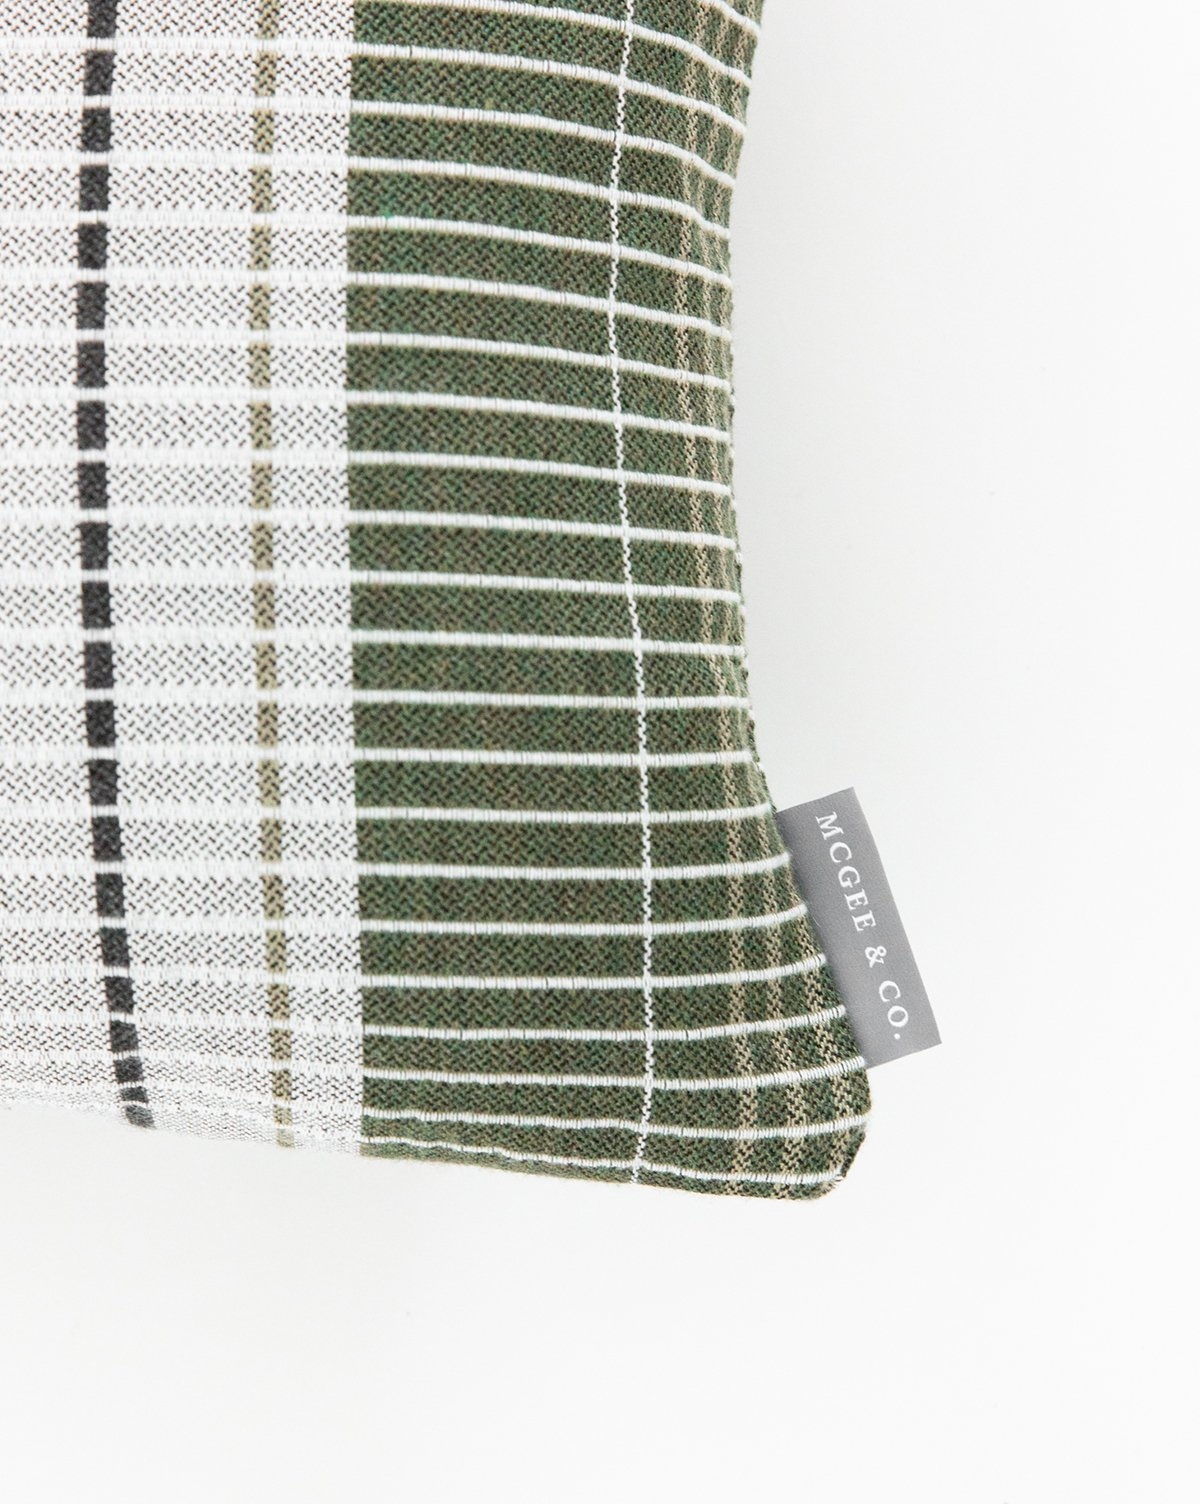 OXFORD WOVEN PLAID PILLOW WITHOUT INSERT, GREEN, 20" x 20" - Image 1